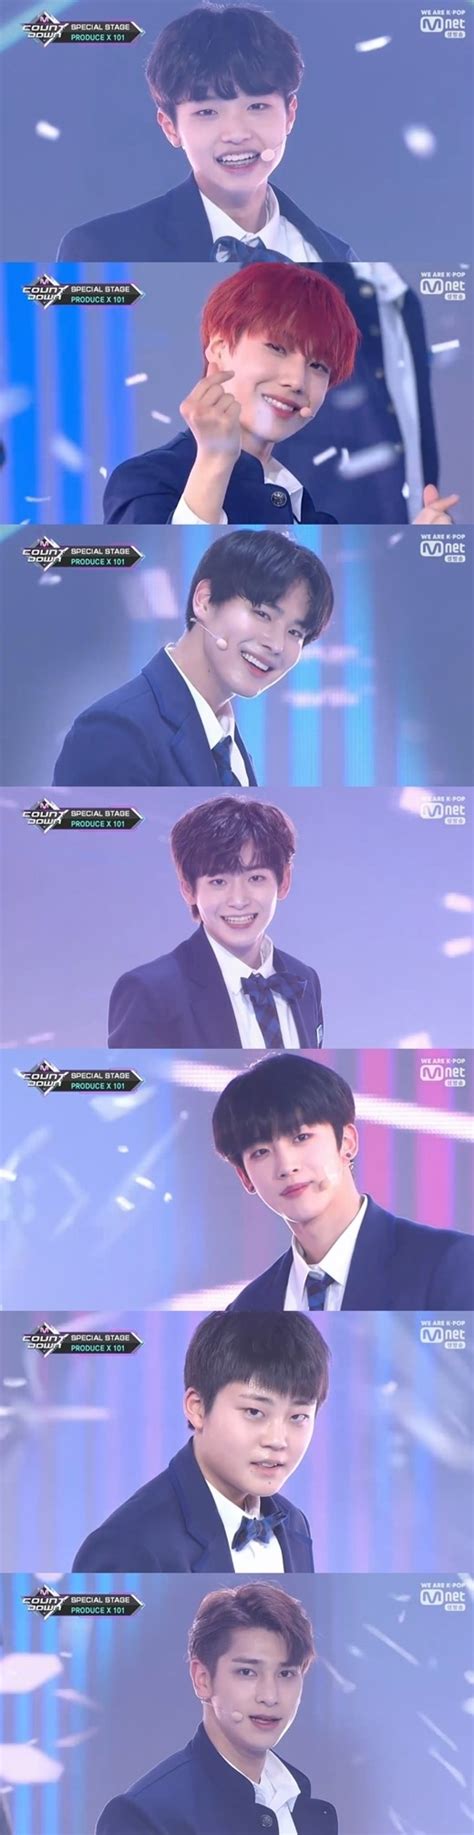 The group will perform together for five years before returning to their respective labels. 「PRODUCE X 101」タイトル曲のステージを初披露…注目のセンターは？（動画あり） - MUSIC - 韓流 ...